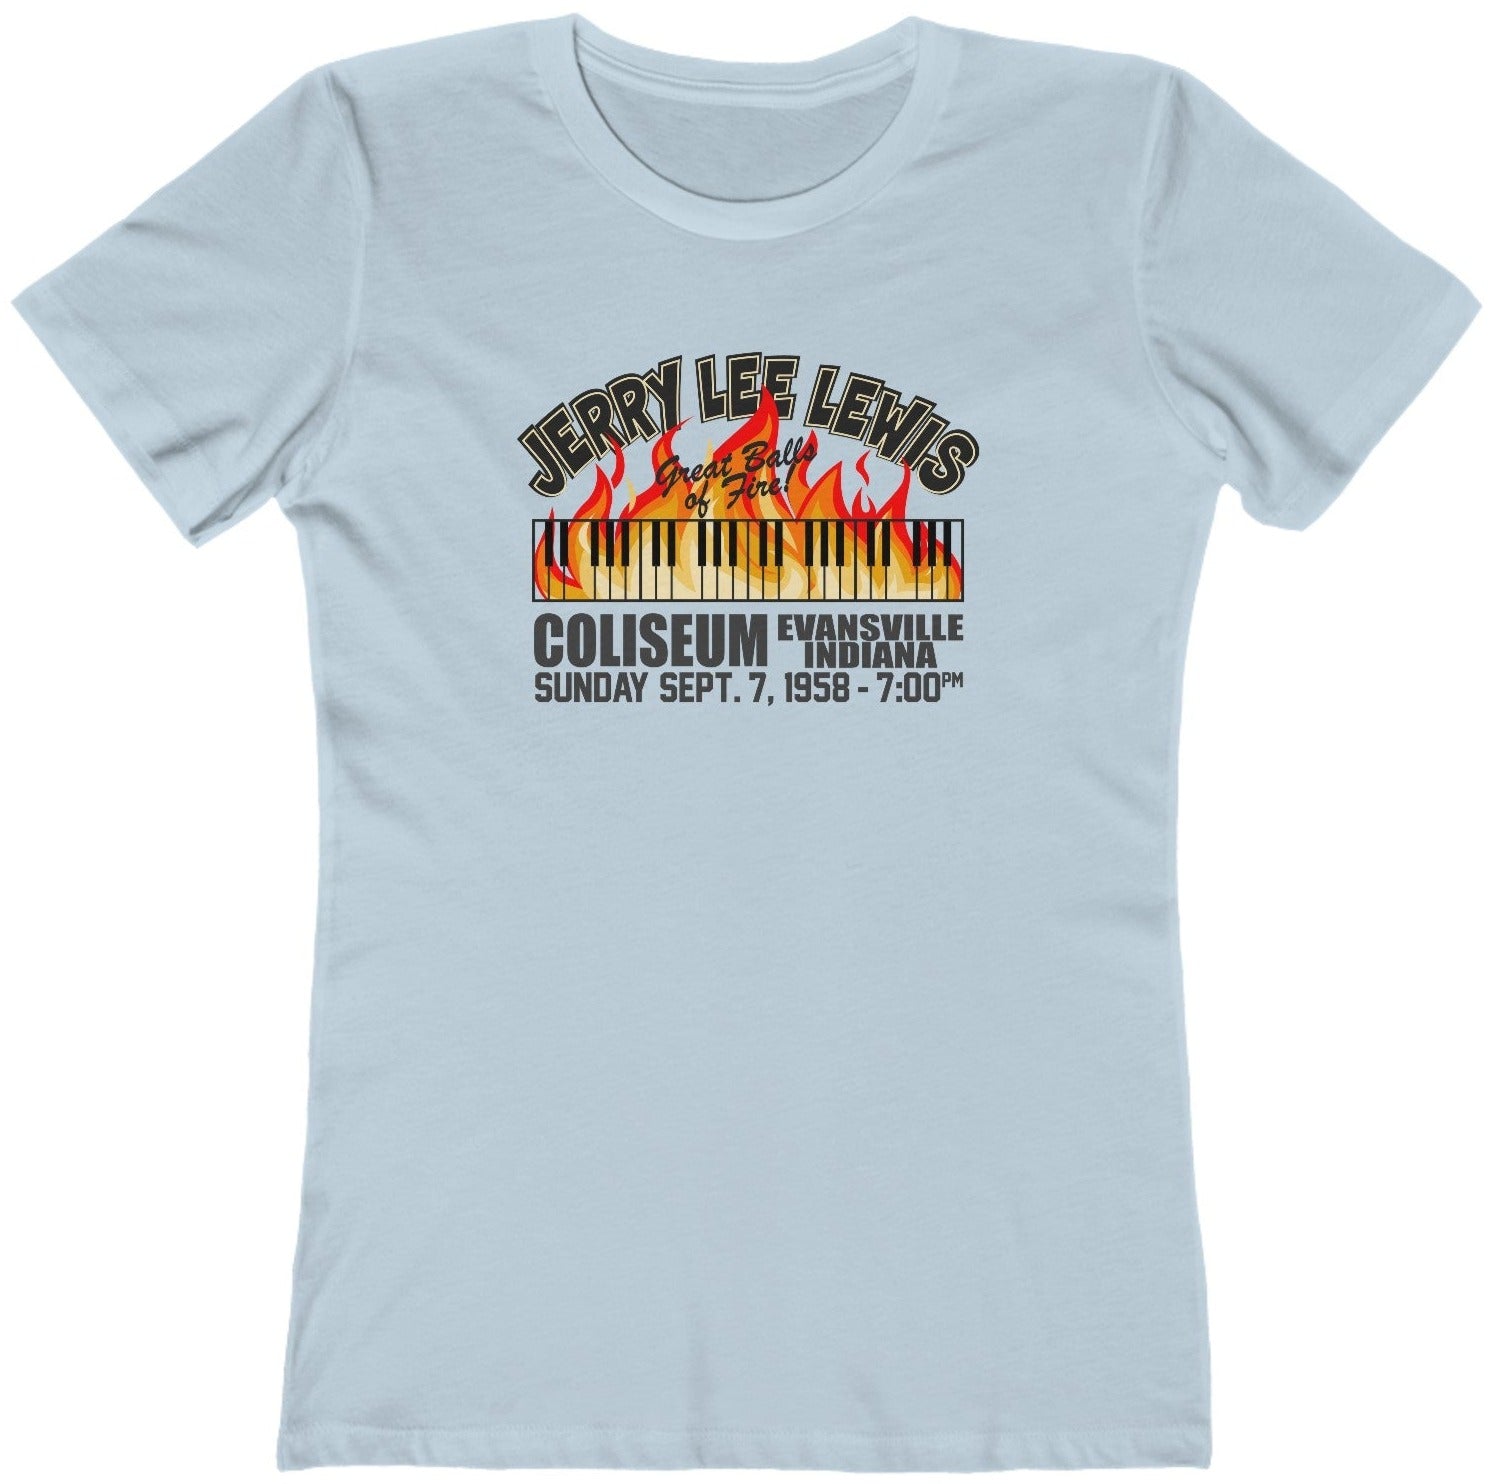 Jerry Lee Lewis t shirt